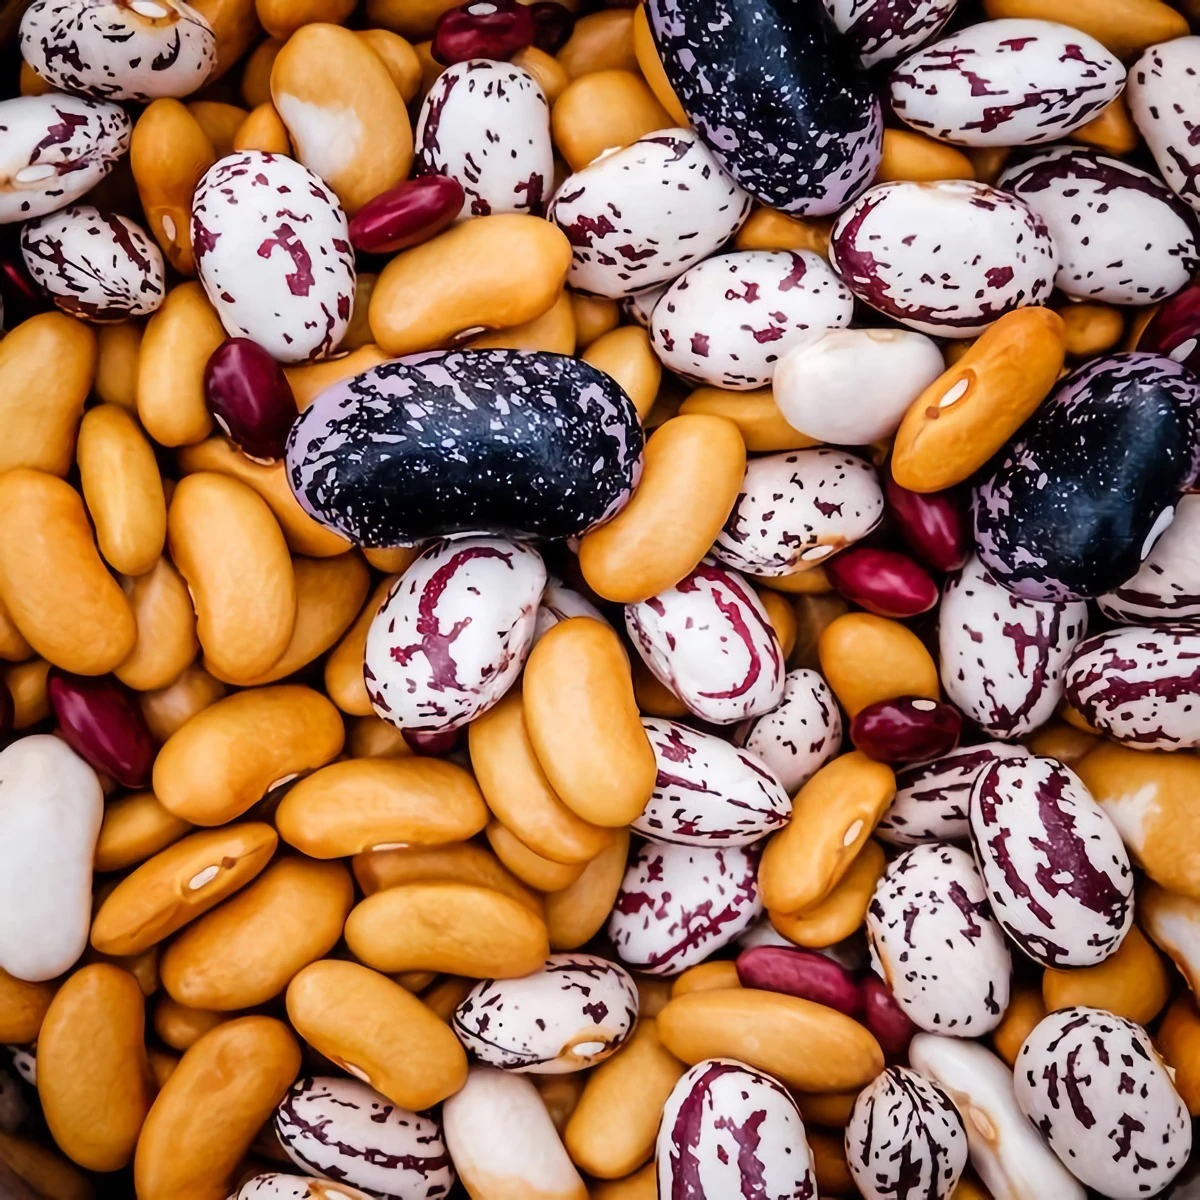 foods that cause bloating different kinds of beans mixed together